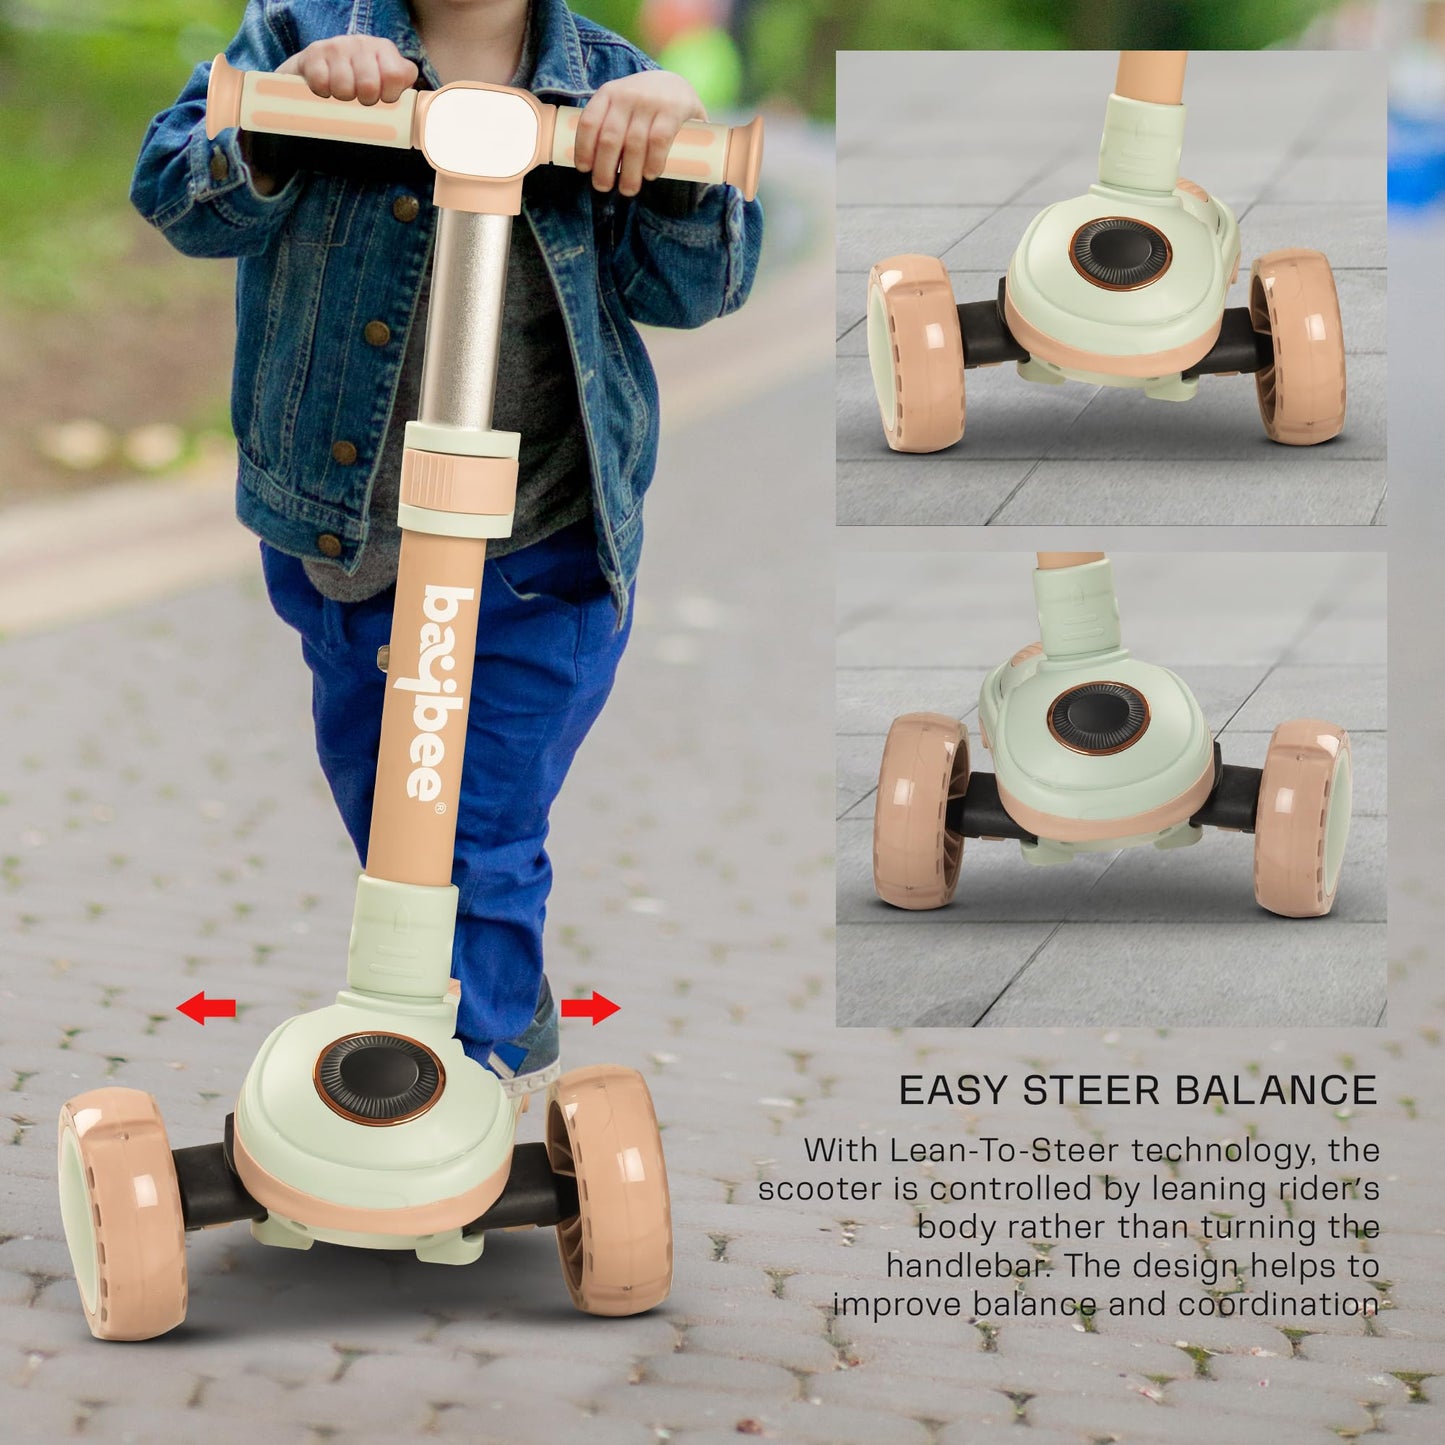 Baybee Taz Skate Scooter for Kids, Smart 3 Wheel Kids Scooter with Height Adjustable & Music | Kick Scooter with LED PU Wheels, Rear Brake